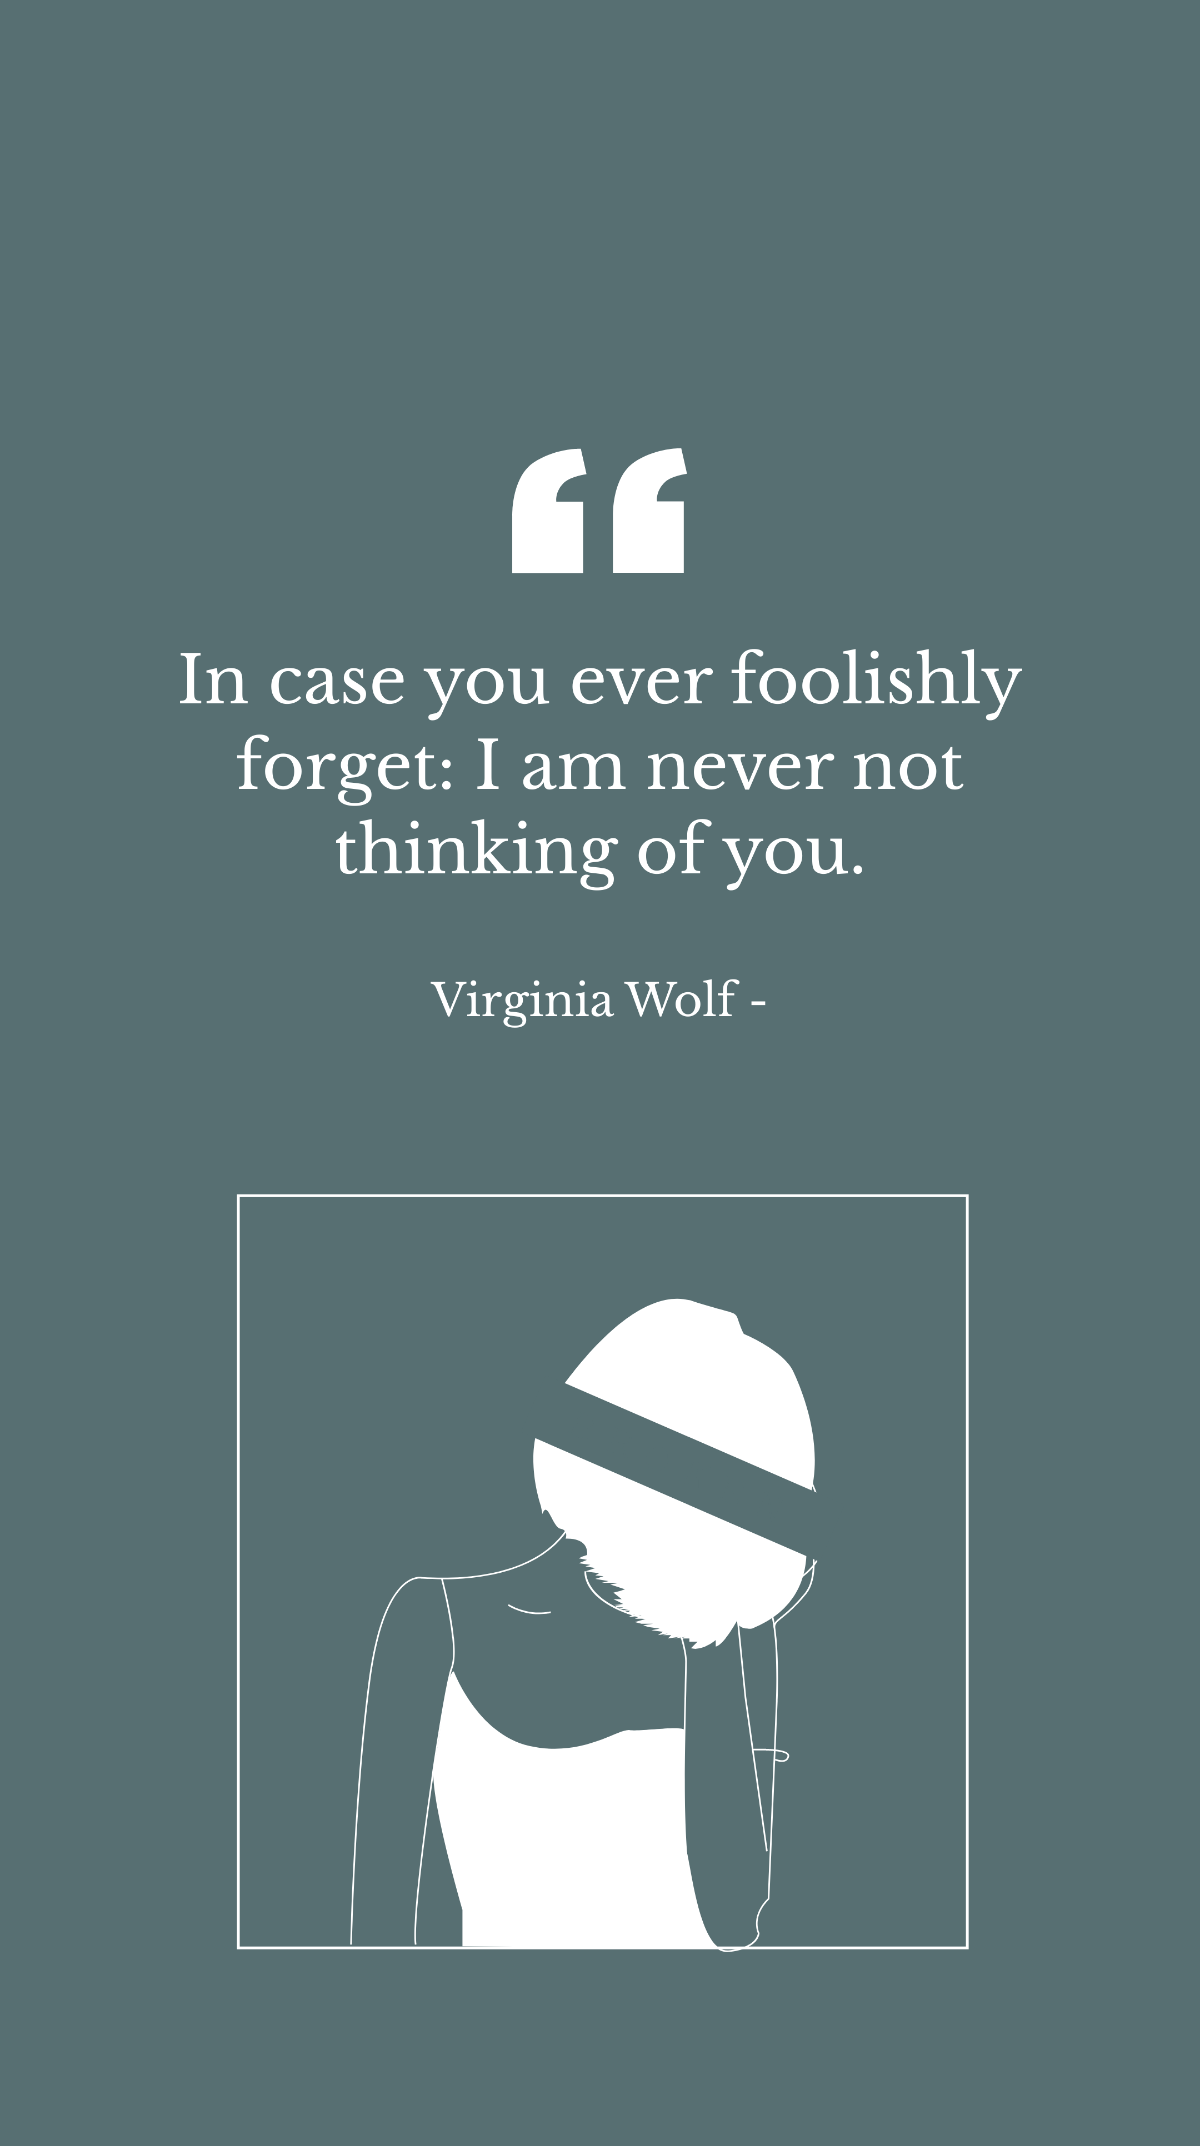 Virginia Wolf - In case you ever foolishly forget: I am never not thinking of you. Template